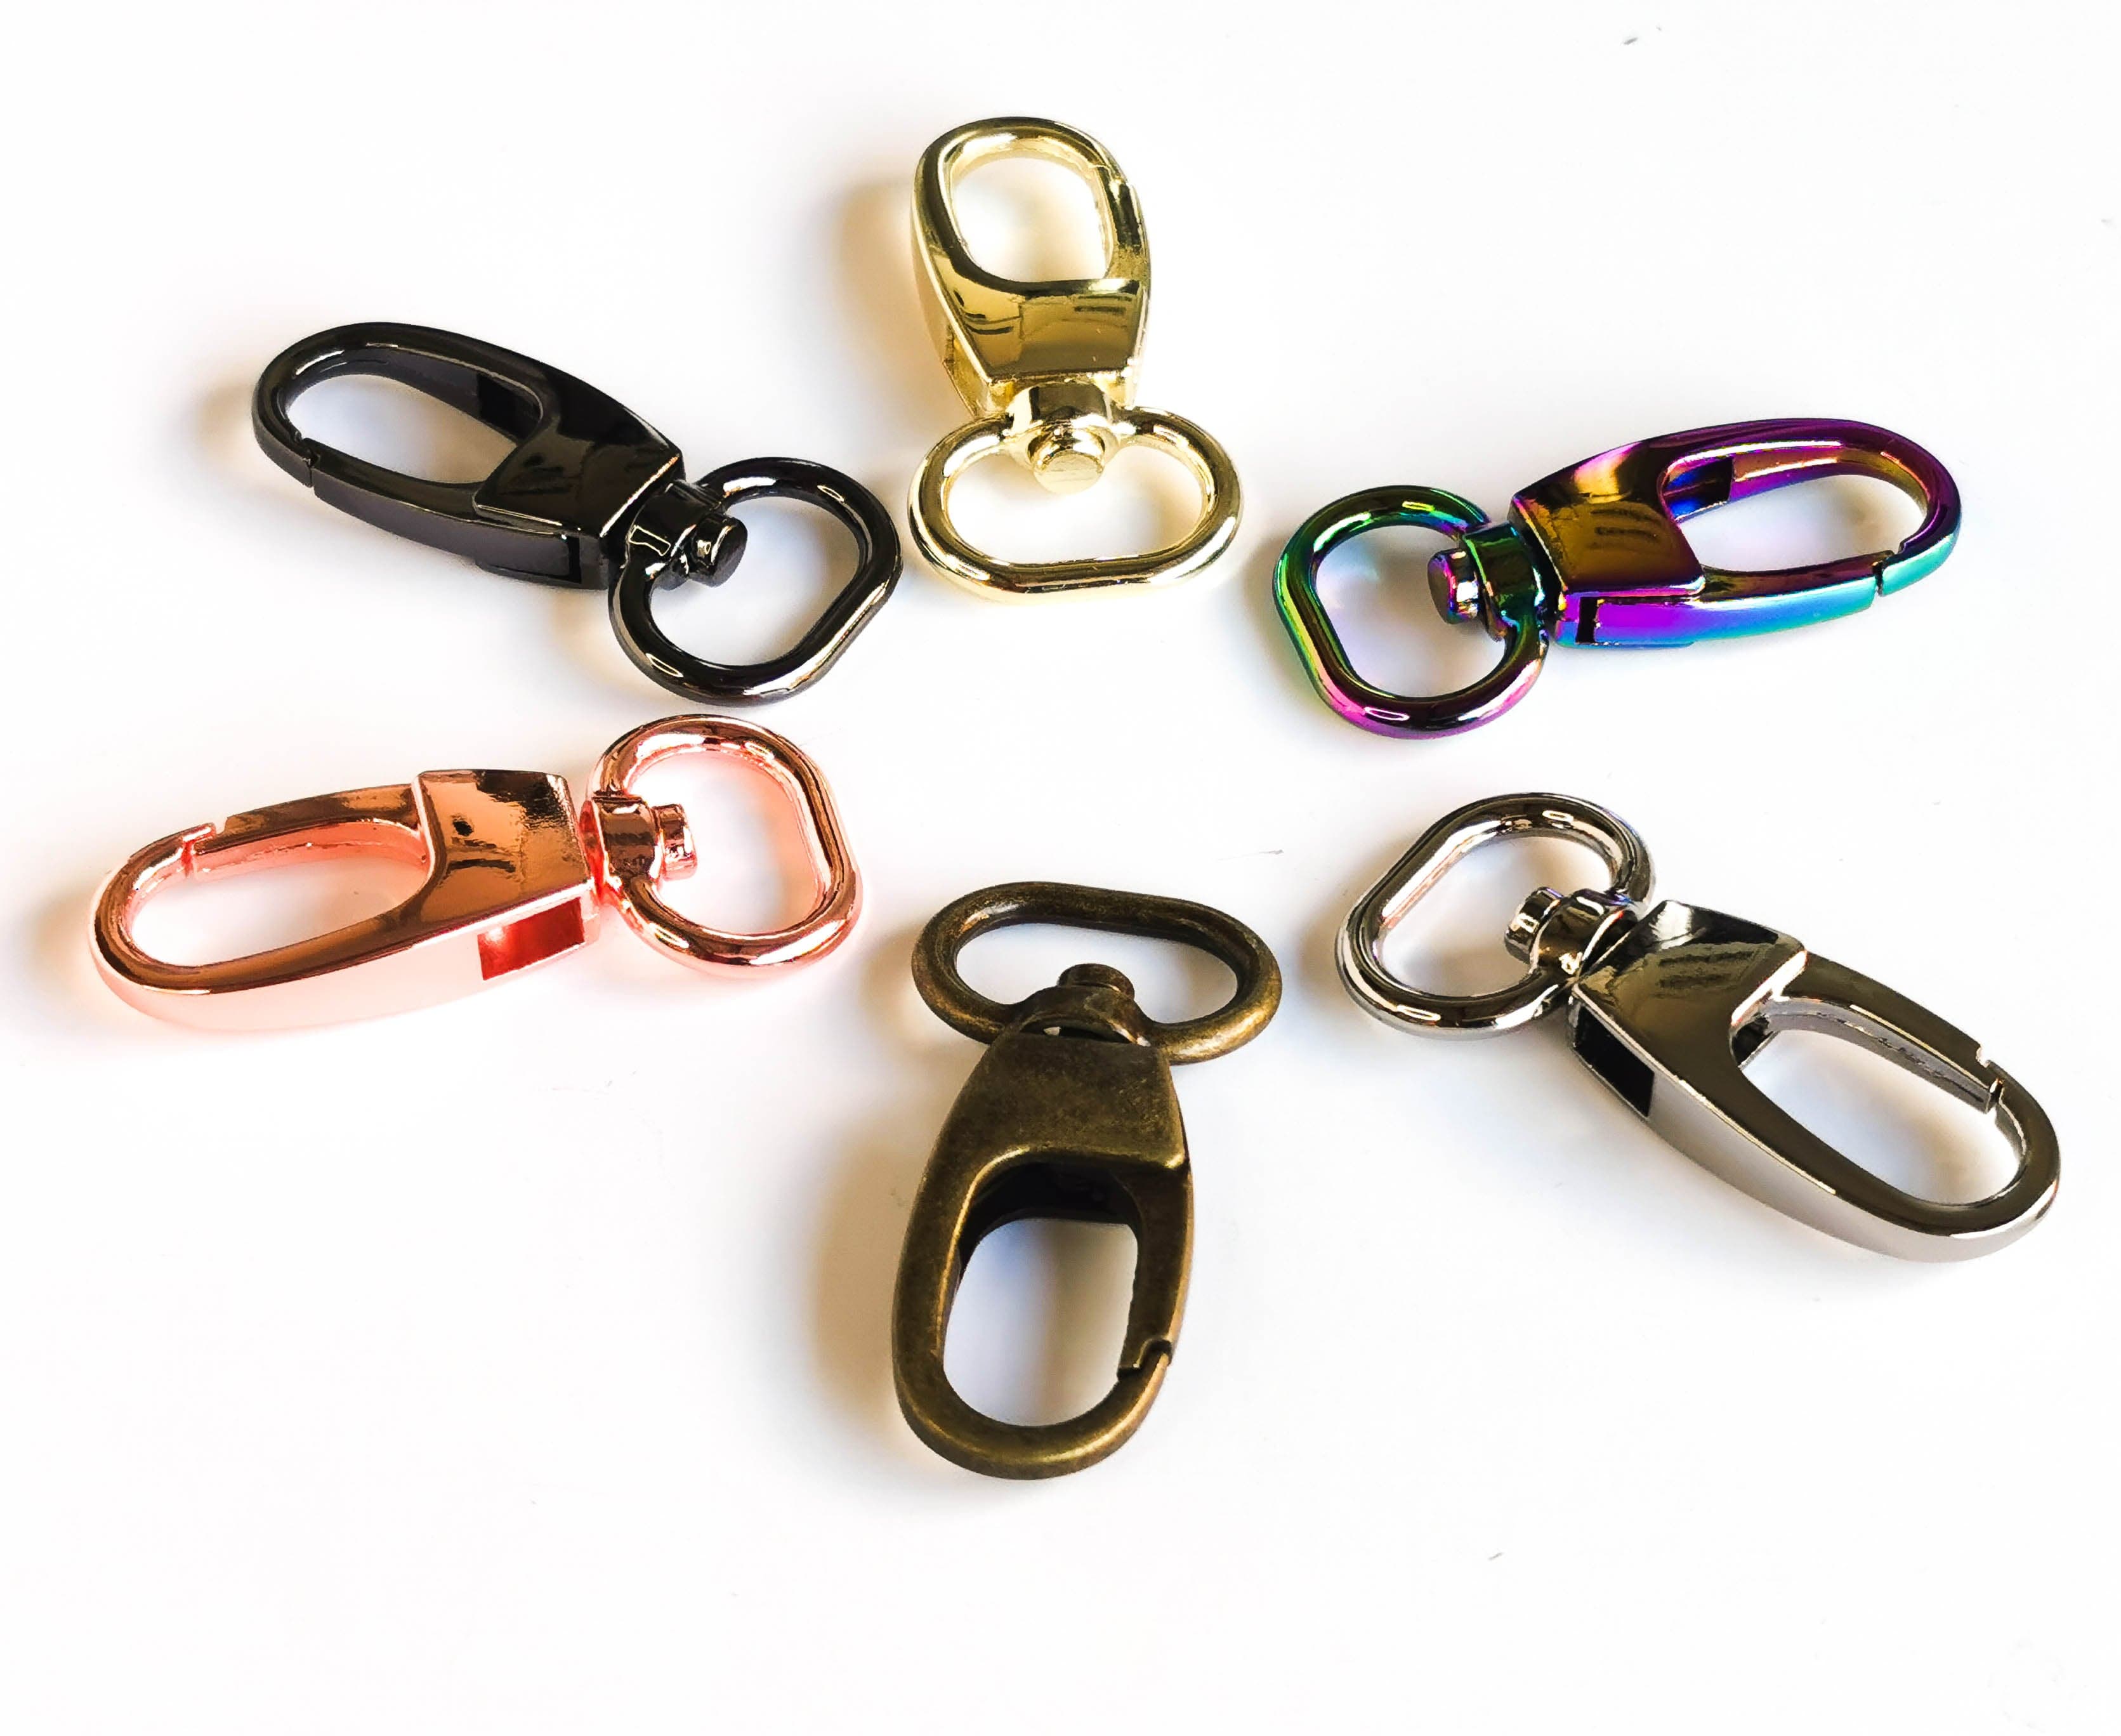 Swivel Snap Hooks for Bags. (Lobster Clasps) By Kiwi Bagineers. Pack o